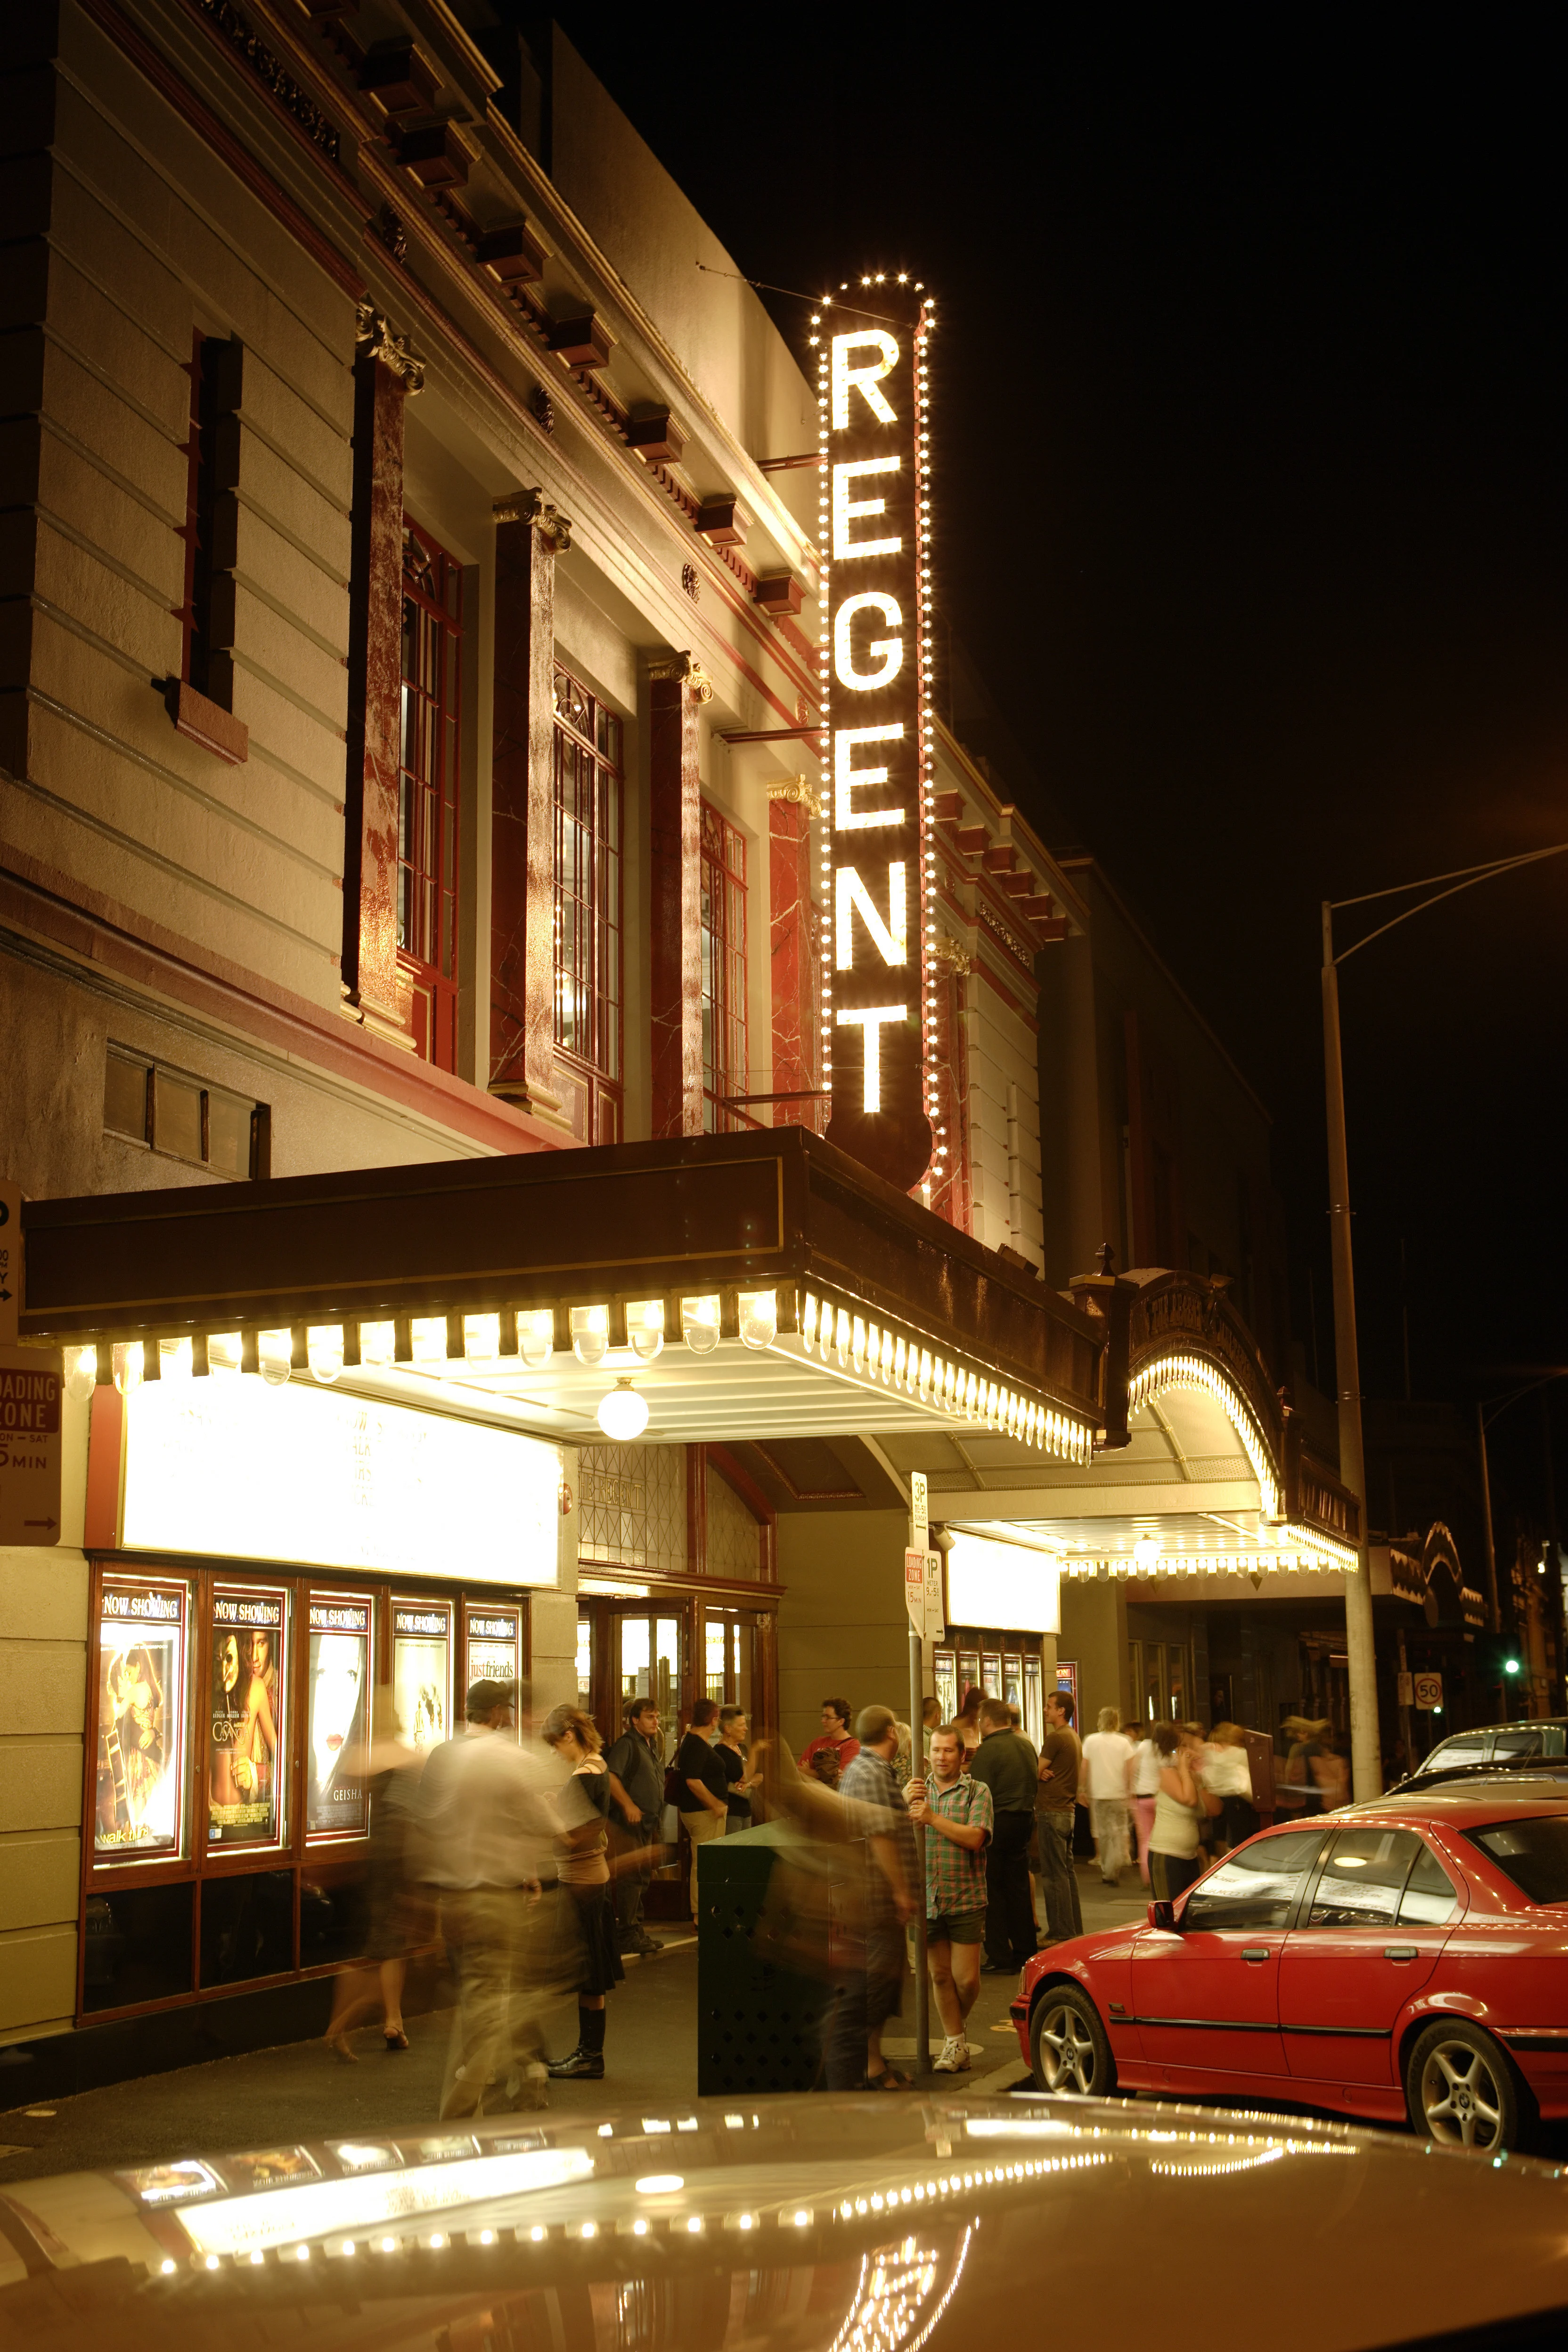 Outside of 1930s style theatre with a glowing vertical sign spelling out "REGENT"